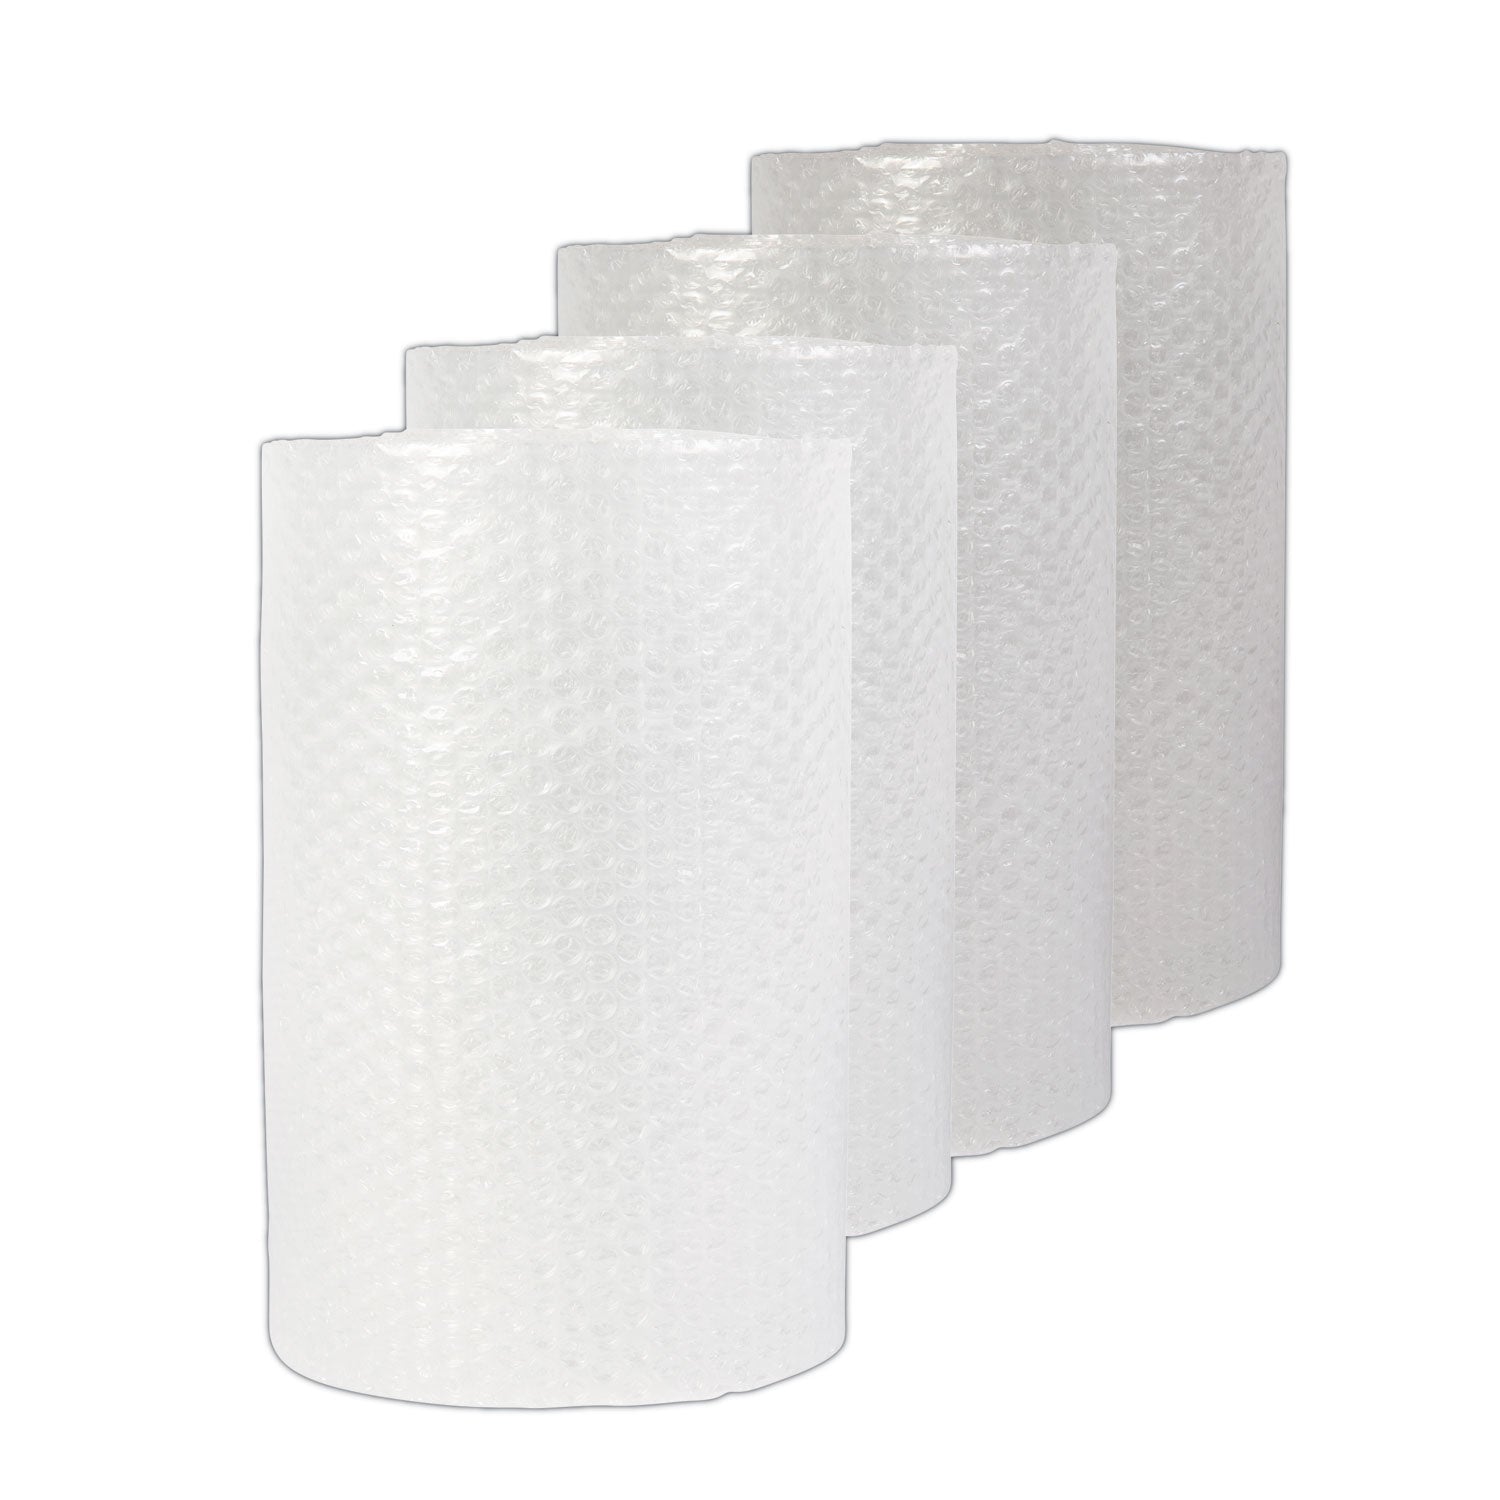 bubble-packaging-031-thick-24-x-75-ft-perforated-every-24-clear-4-carton_unv4087909 - 1